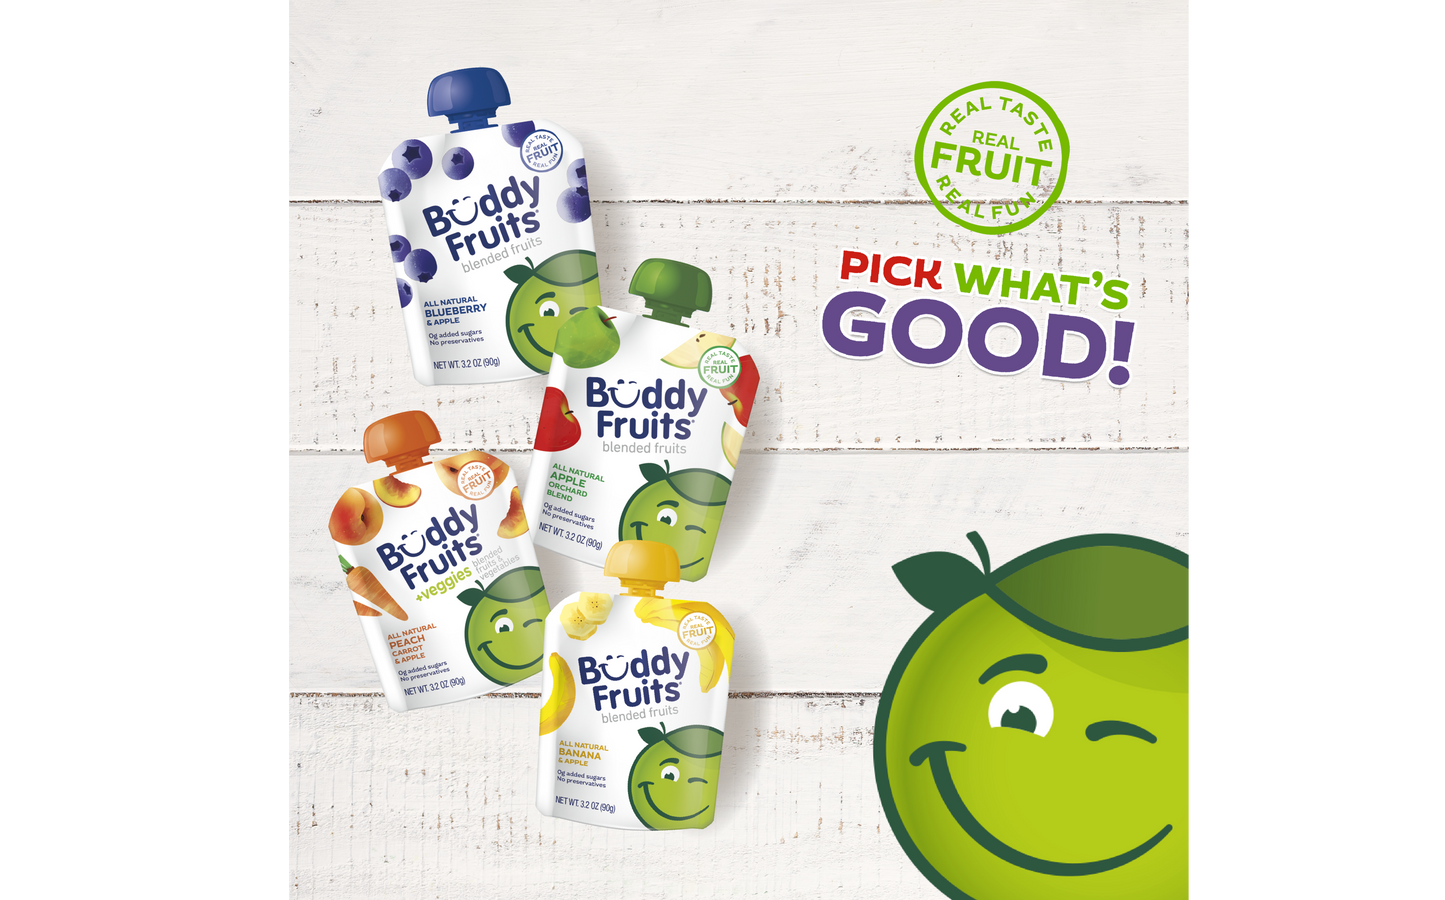 Pick what's good: Buddy Fruit Peach, Carrot, and Apple fruit & veggies pouch.